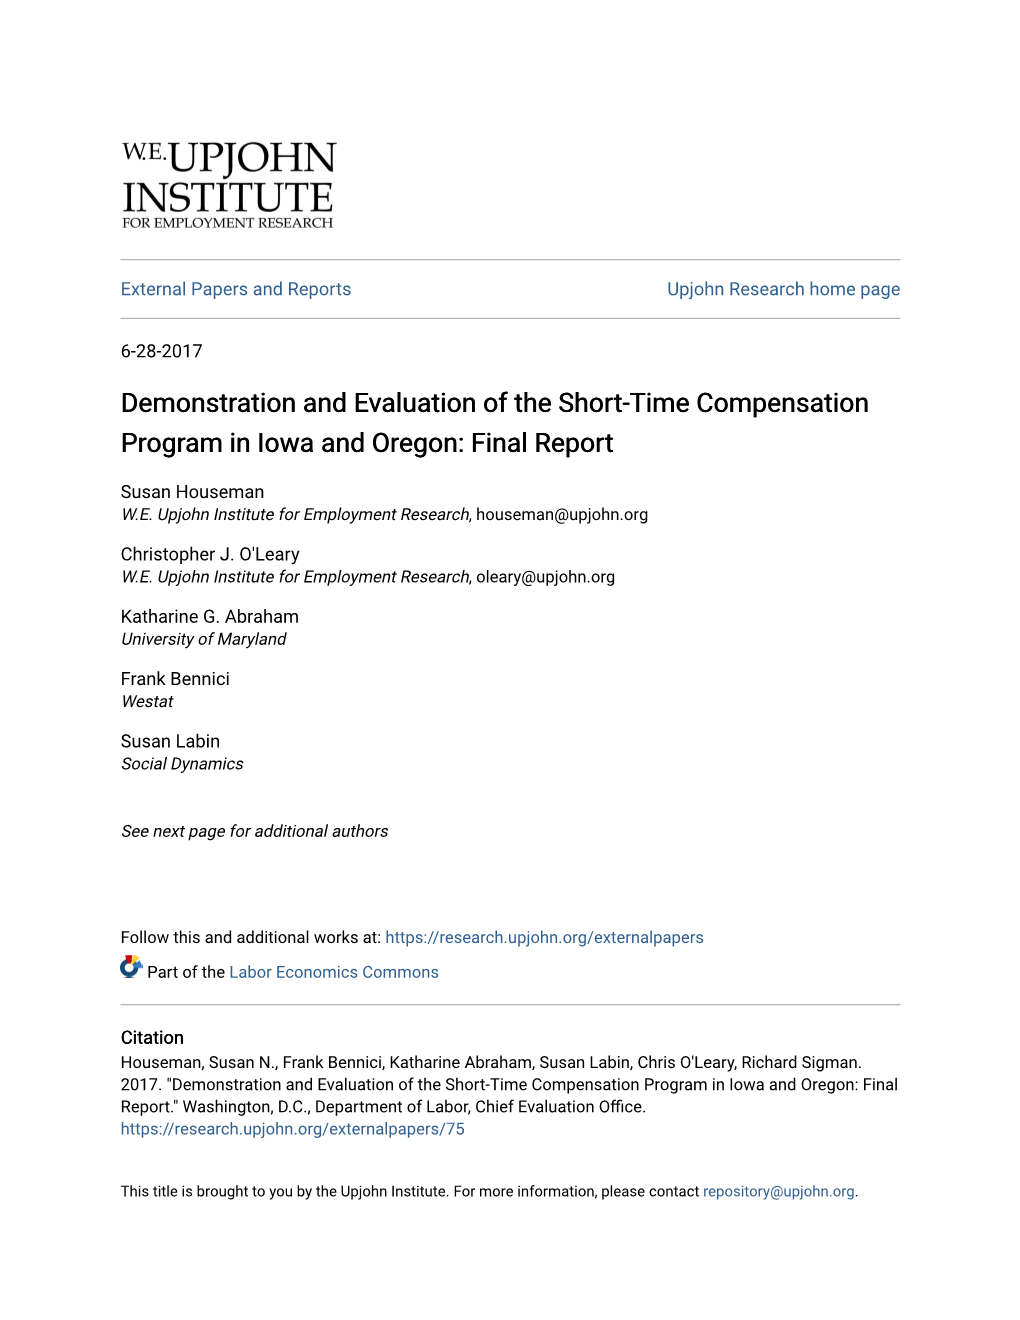 Demonstration and Evaluation of the Short-Time Compensation Program in Iowa and Oregon: Final Report